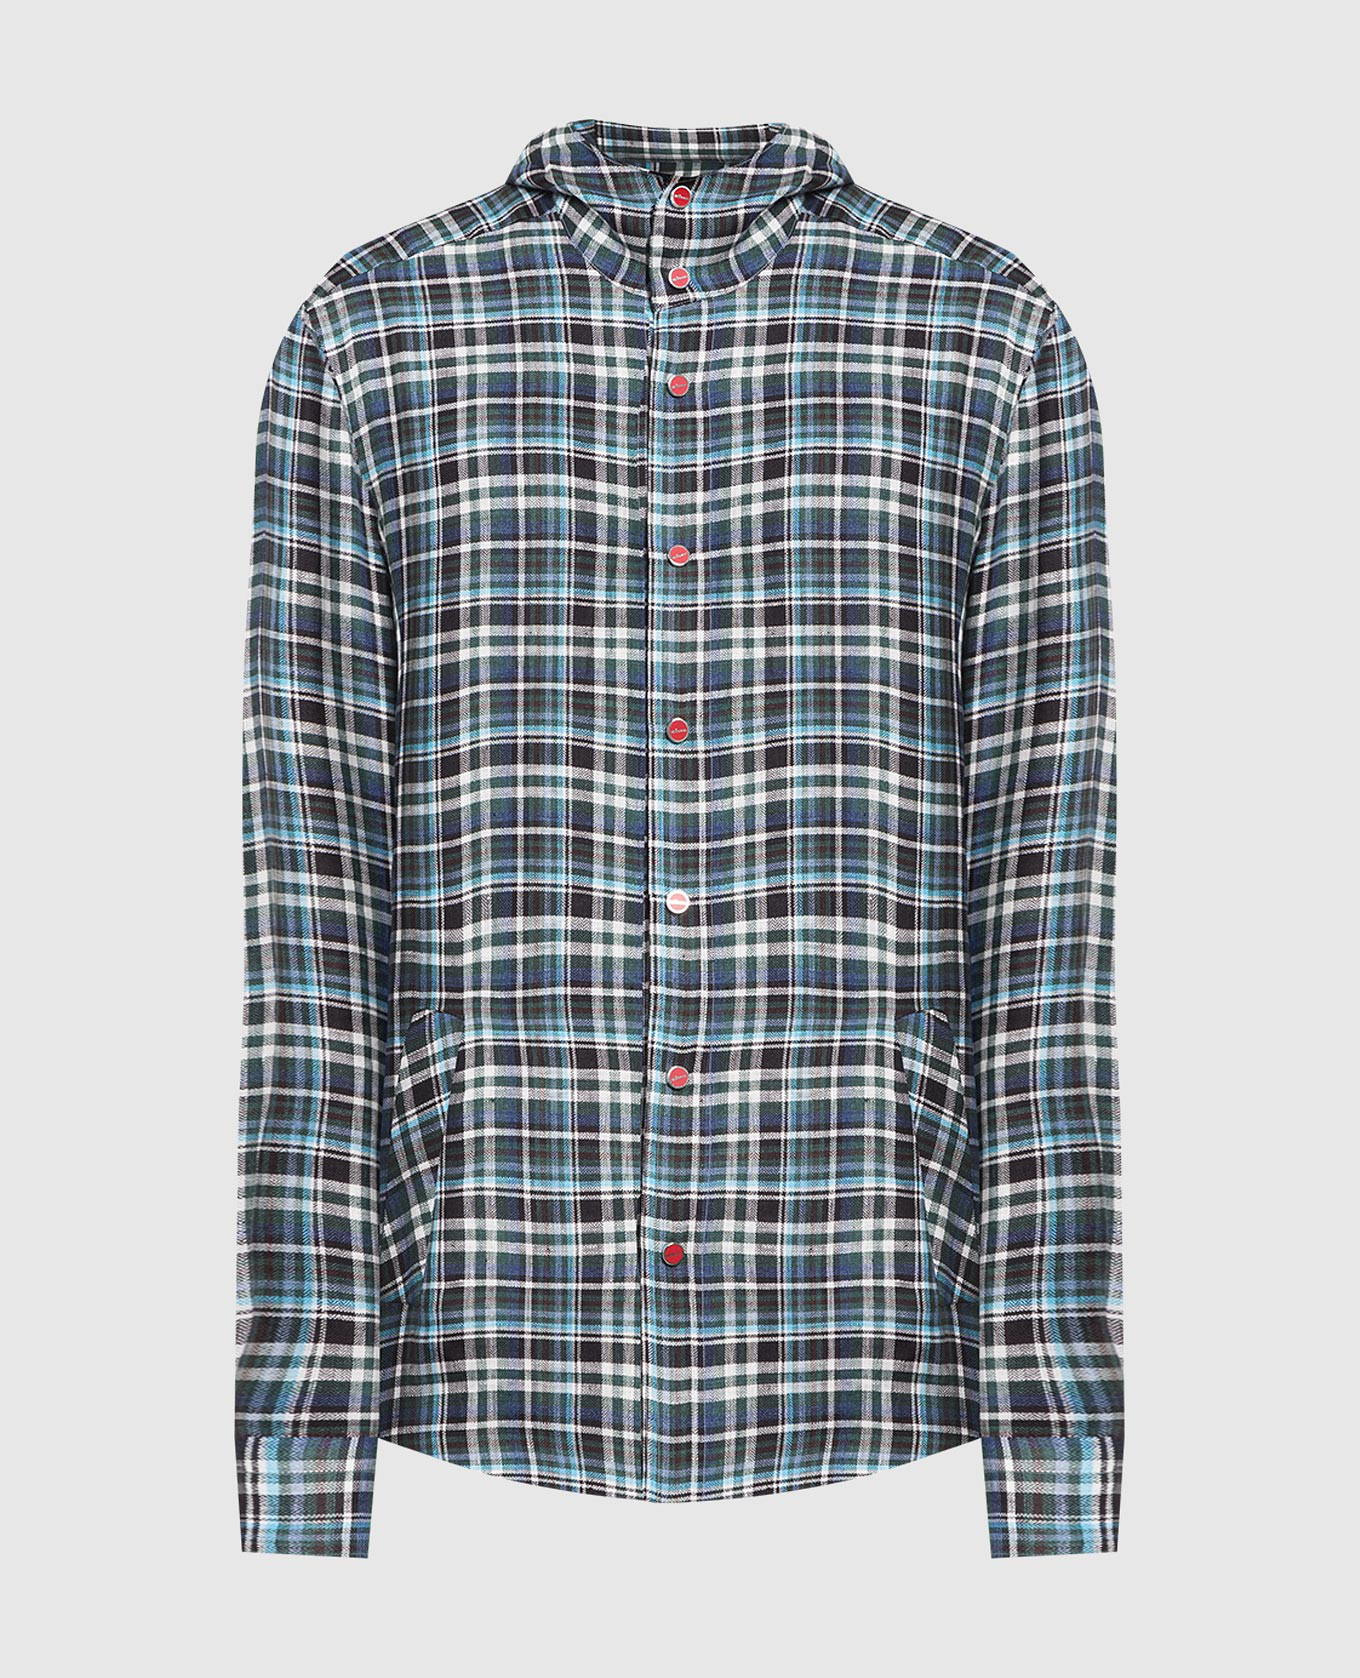 Blue checked shirt made of linen